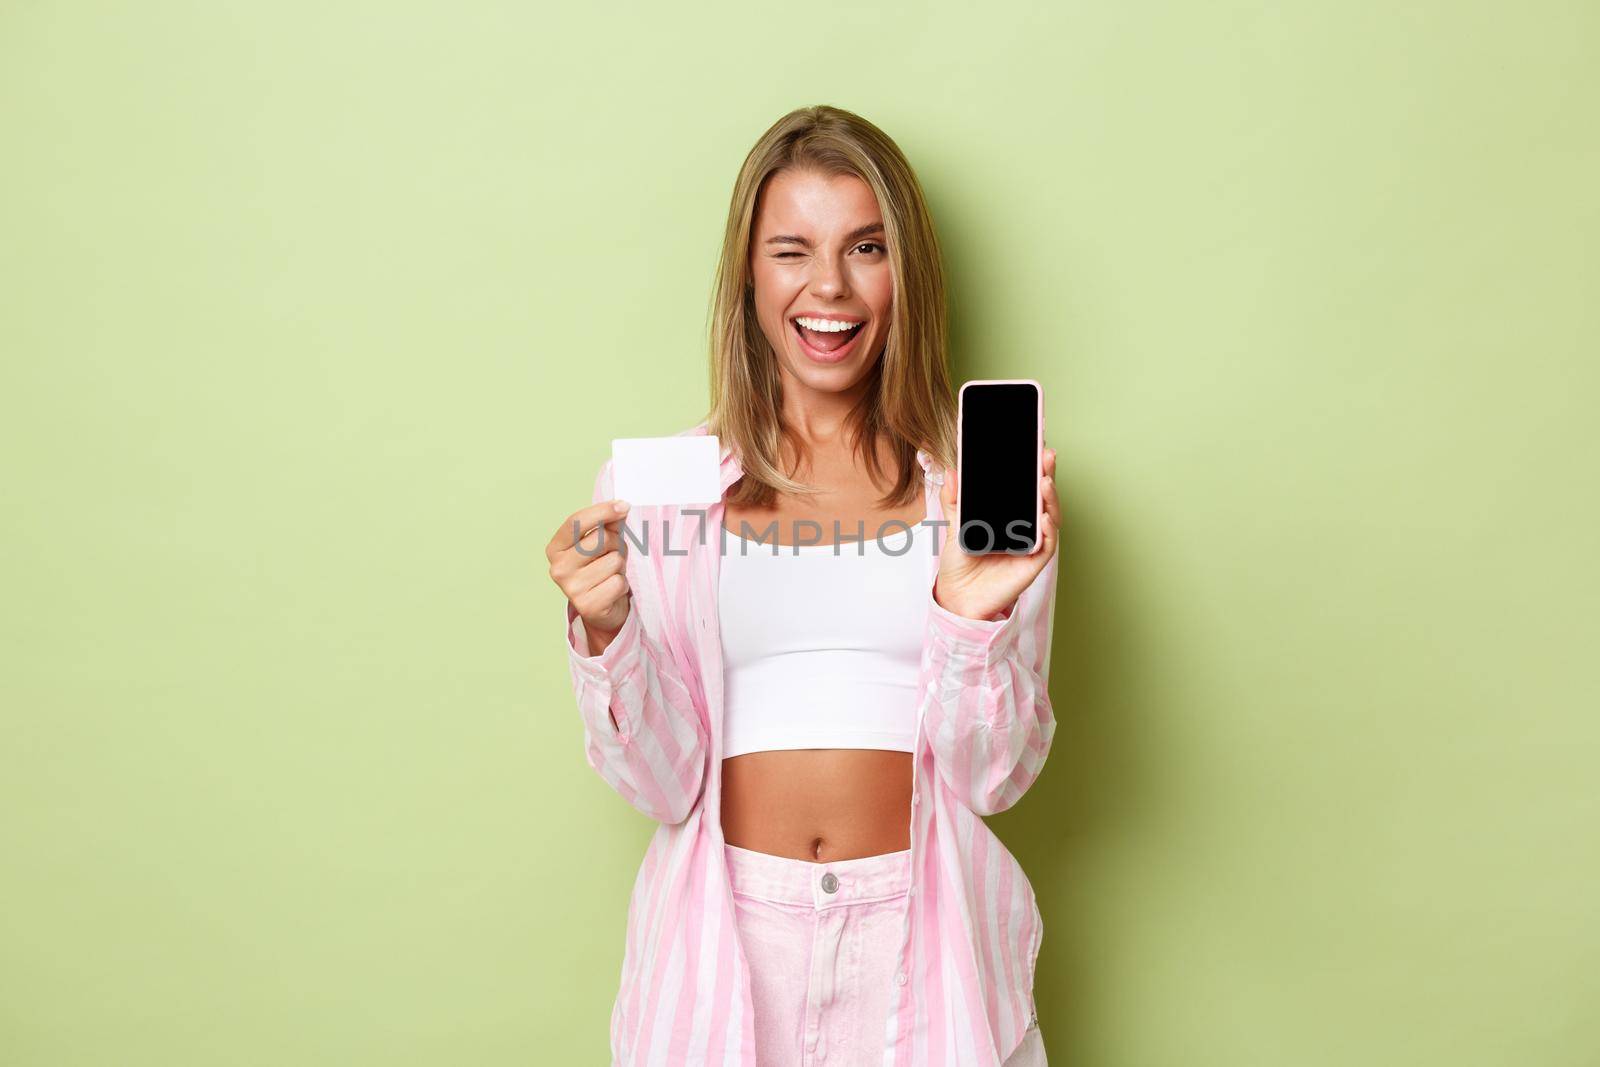 Image of sassy modern girl with blond short hair, showing credit card and mobile phone screen, winking and smiling while advertising application, standing over green background.